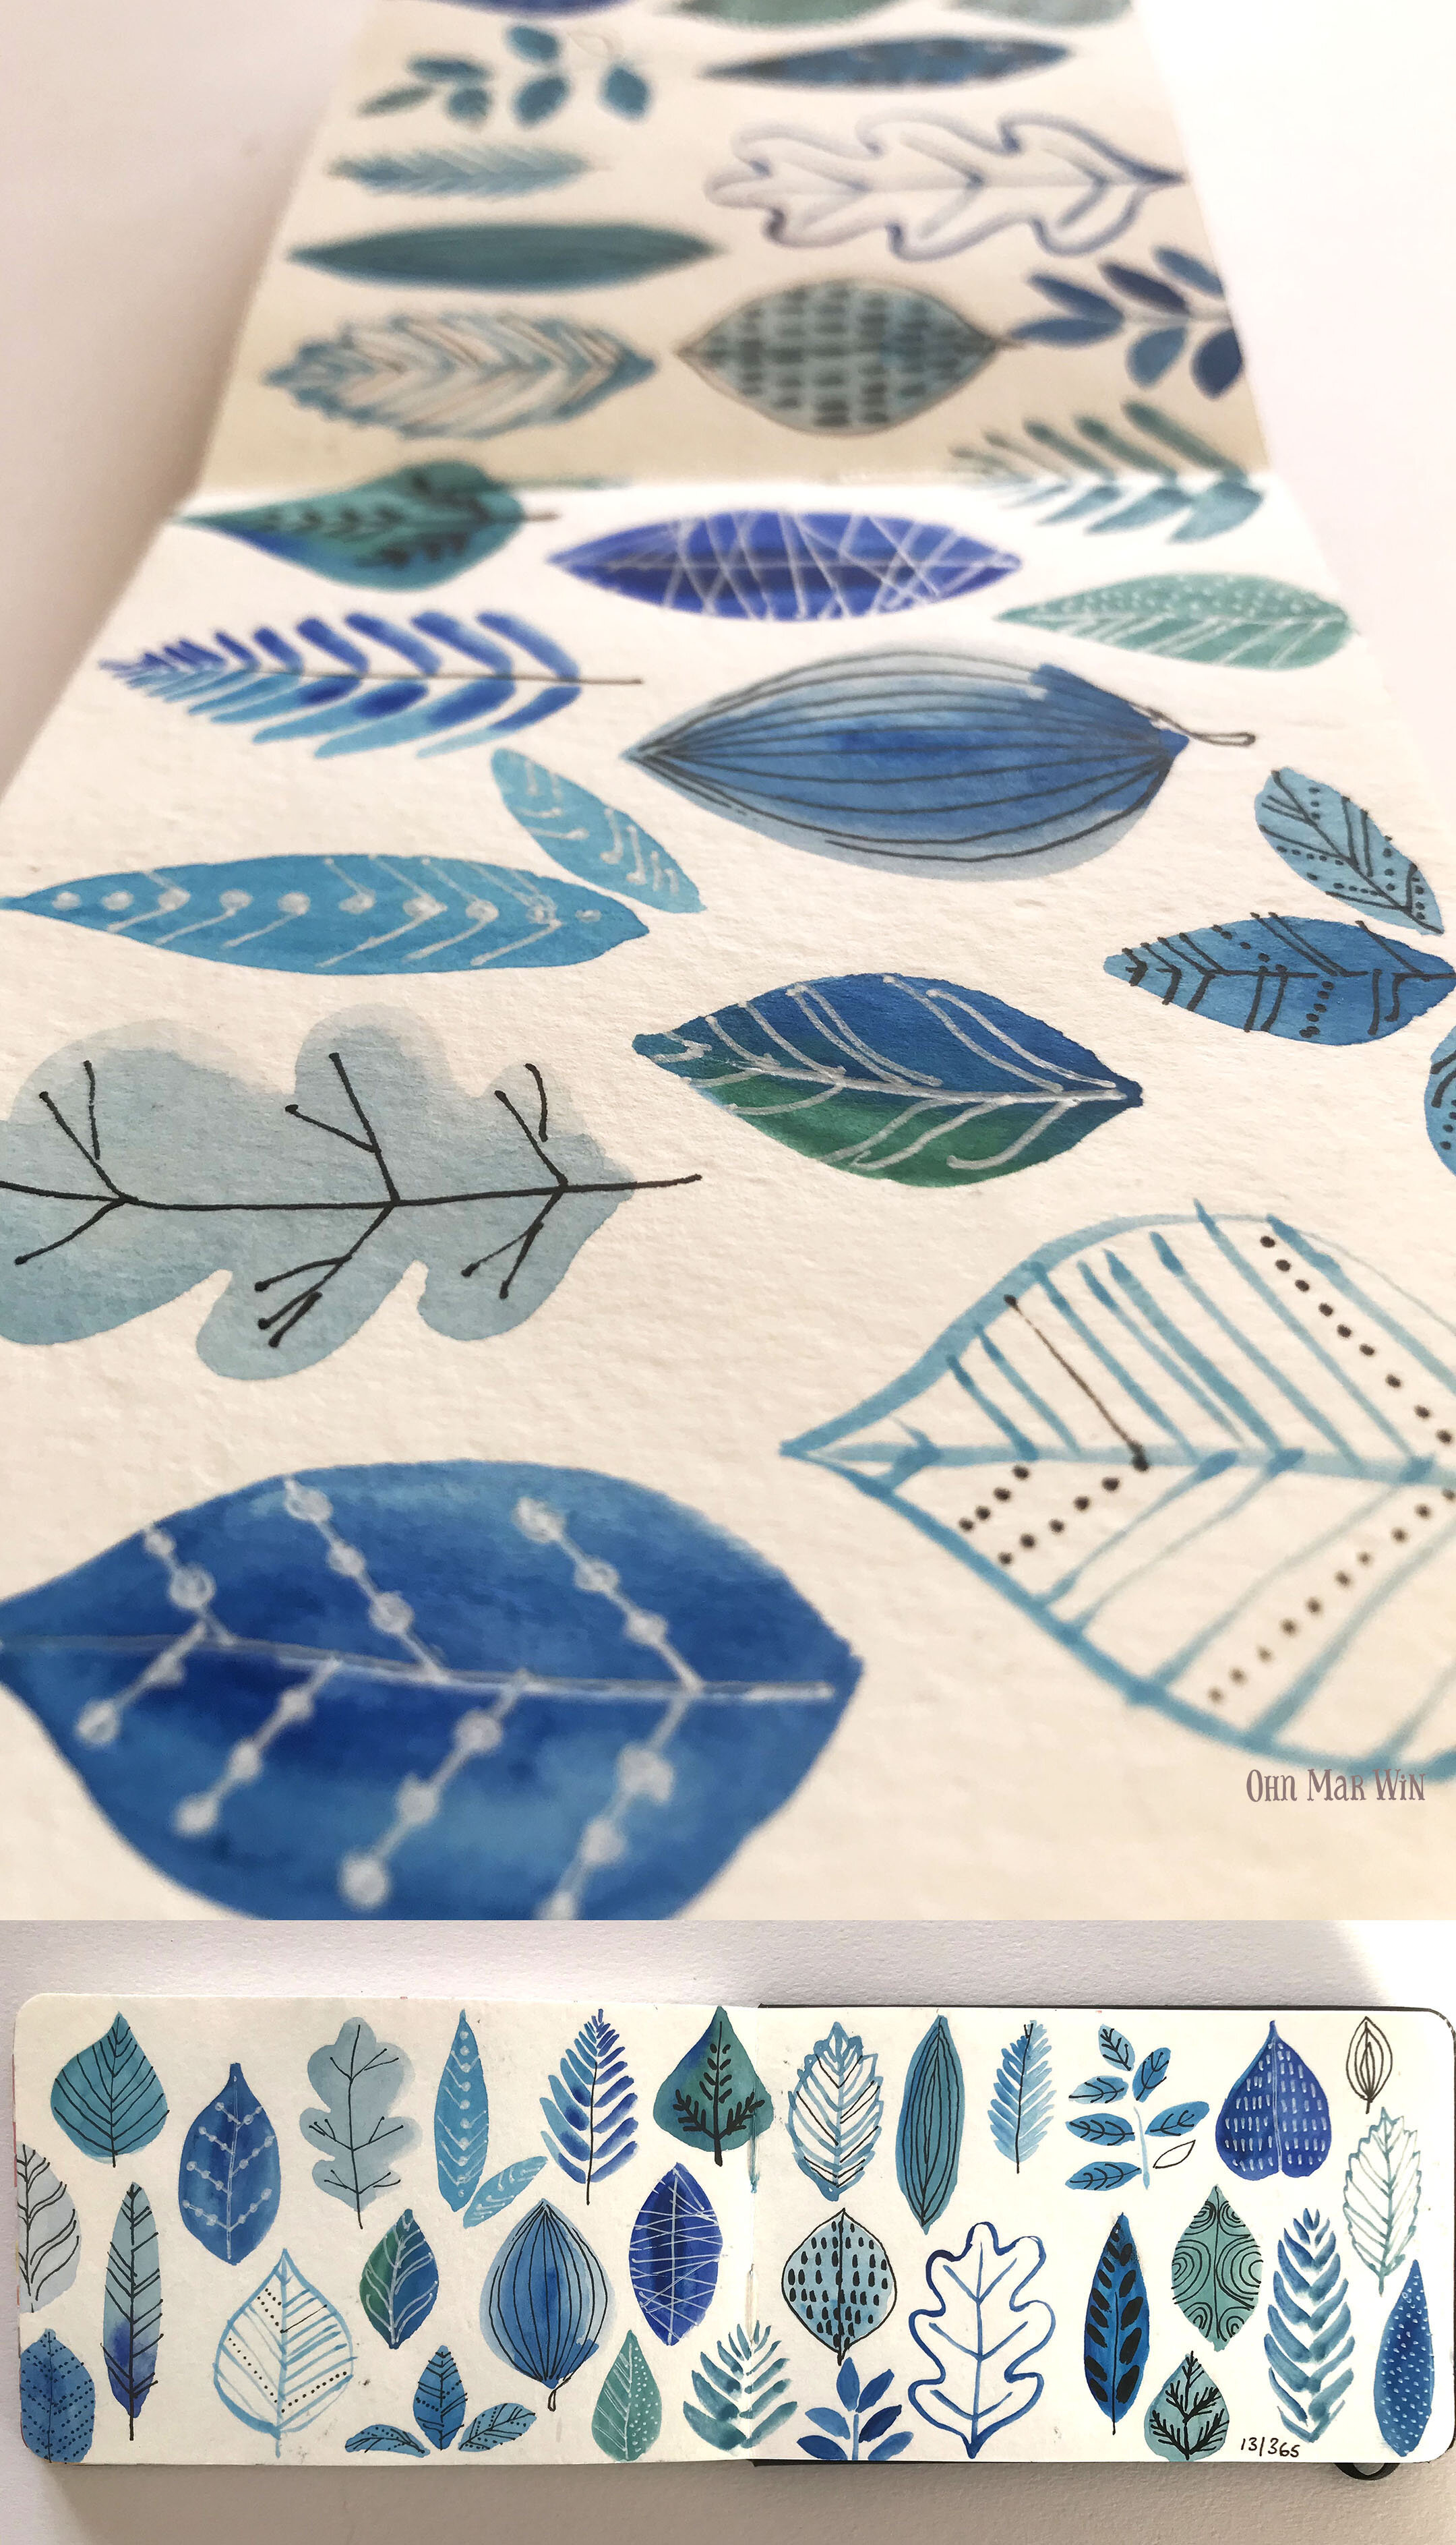 Top Tips for Masking Fluid Magic with Watercolors — Ohn Mar Win Illustration